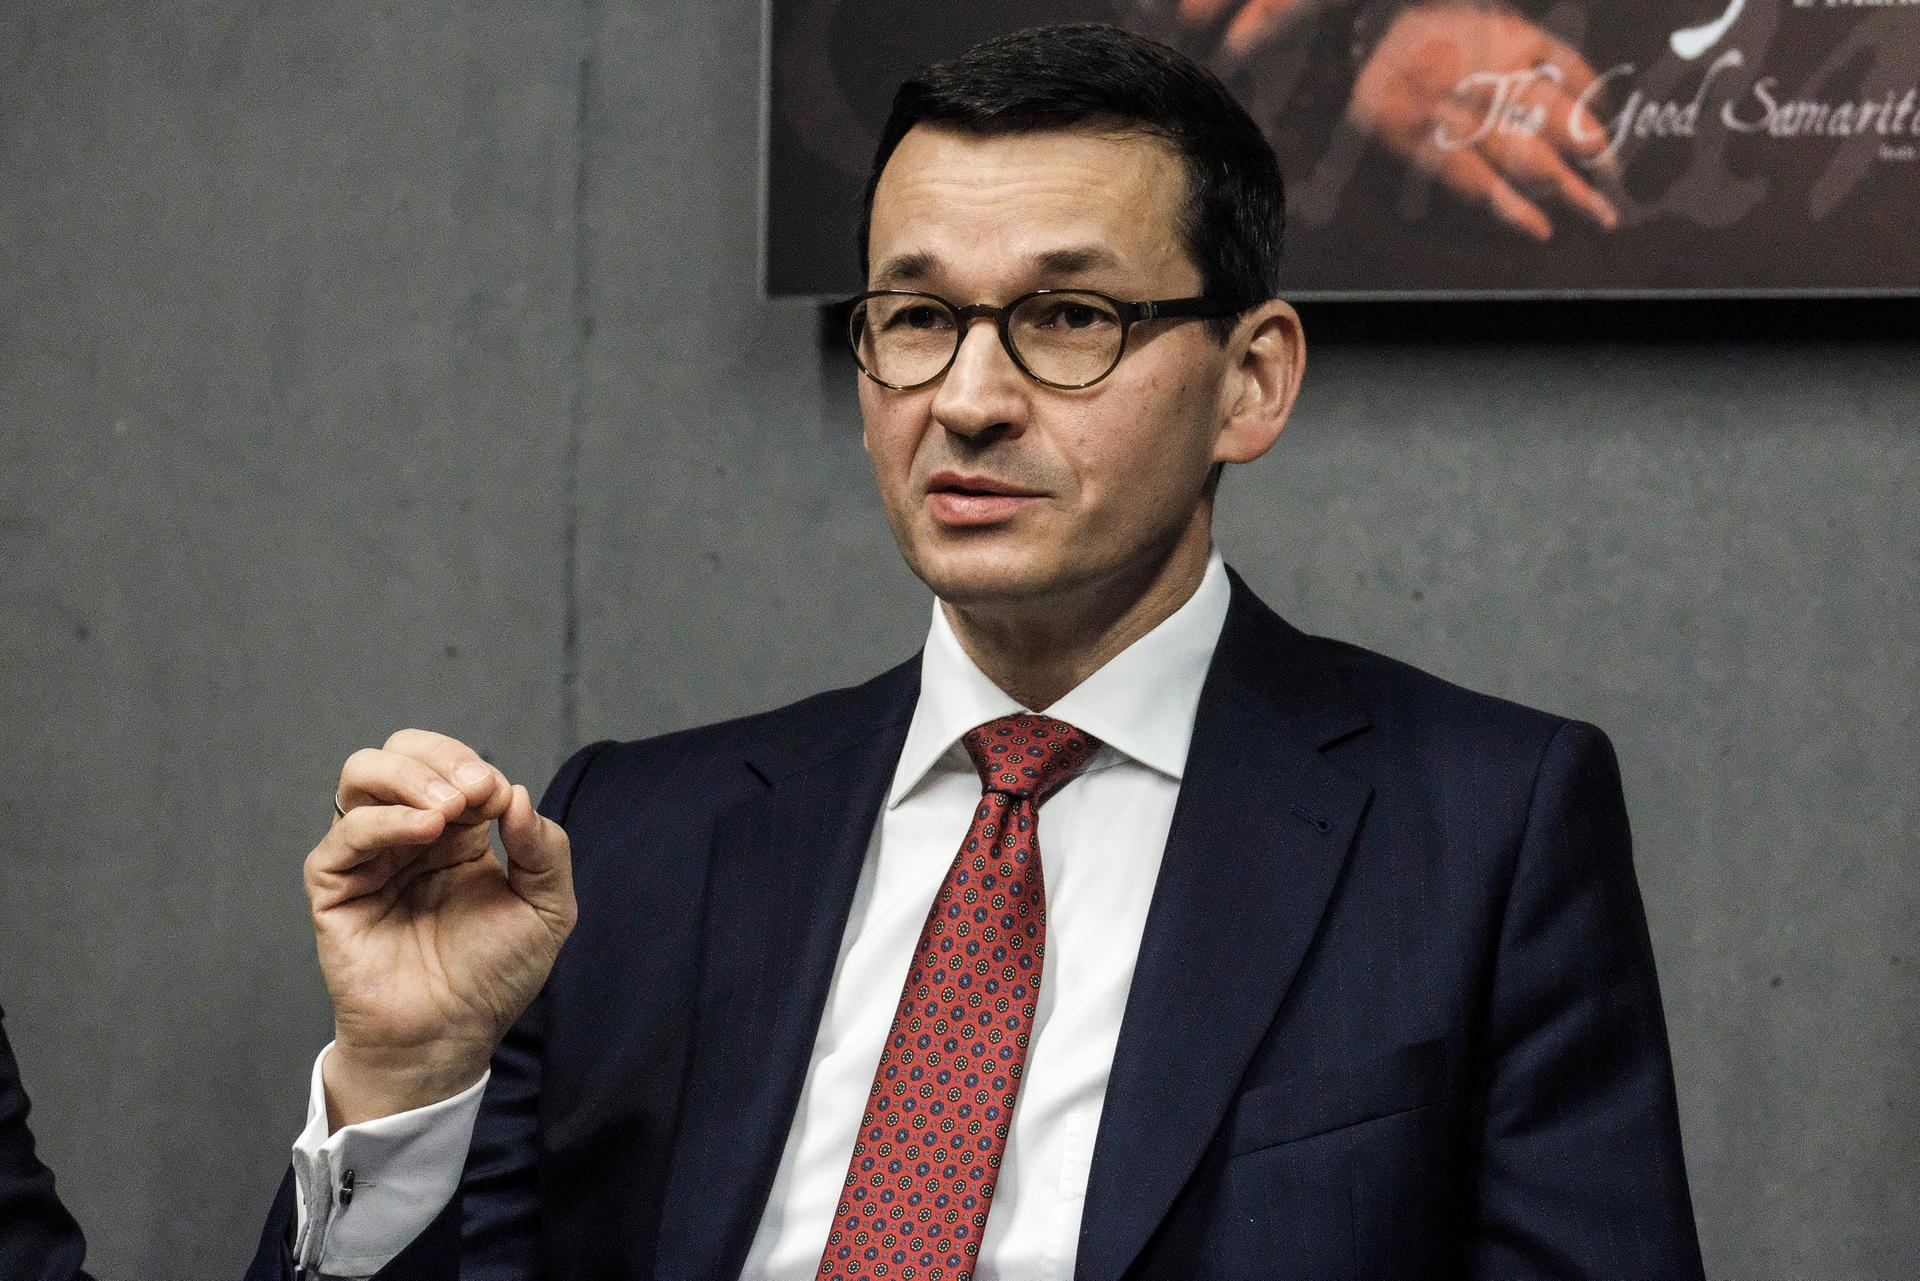 Poland's Prime Minister Mateusz Morawiecki visits the Ulma Family Museum of Poles Who Saved Jews during World War II in Markowa, Poland, February 2, 2018.